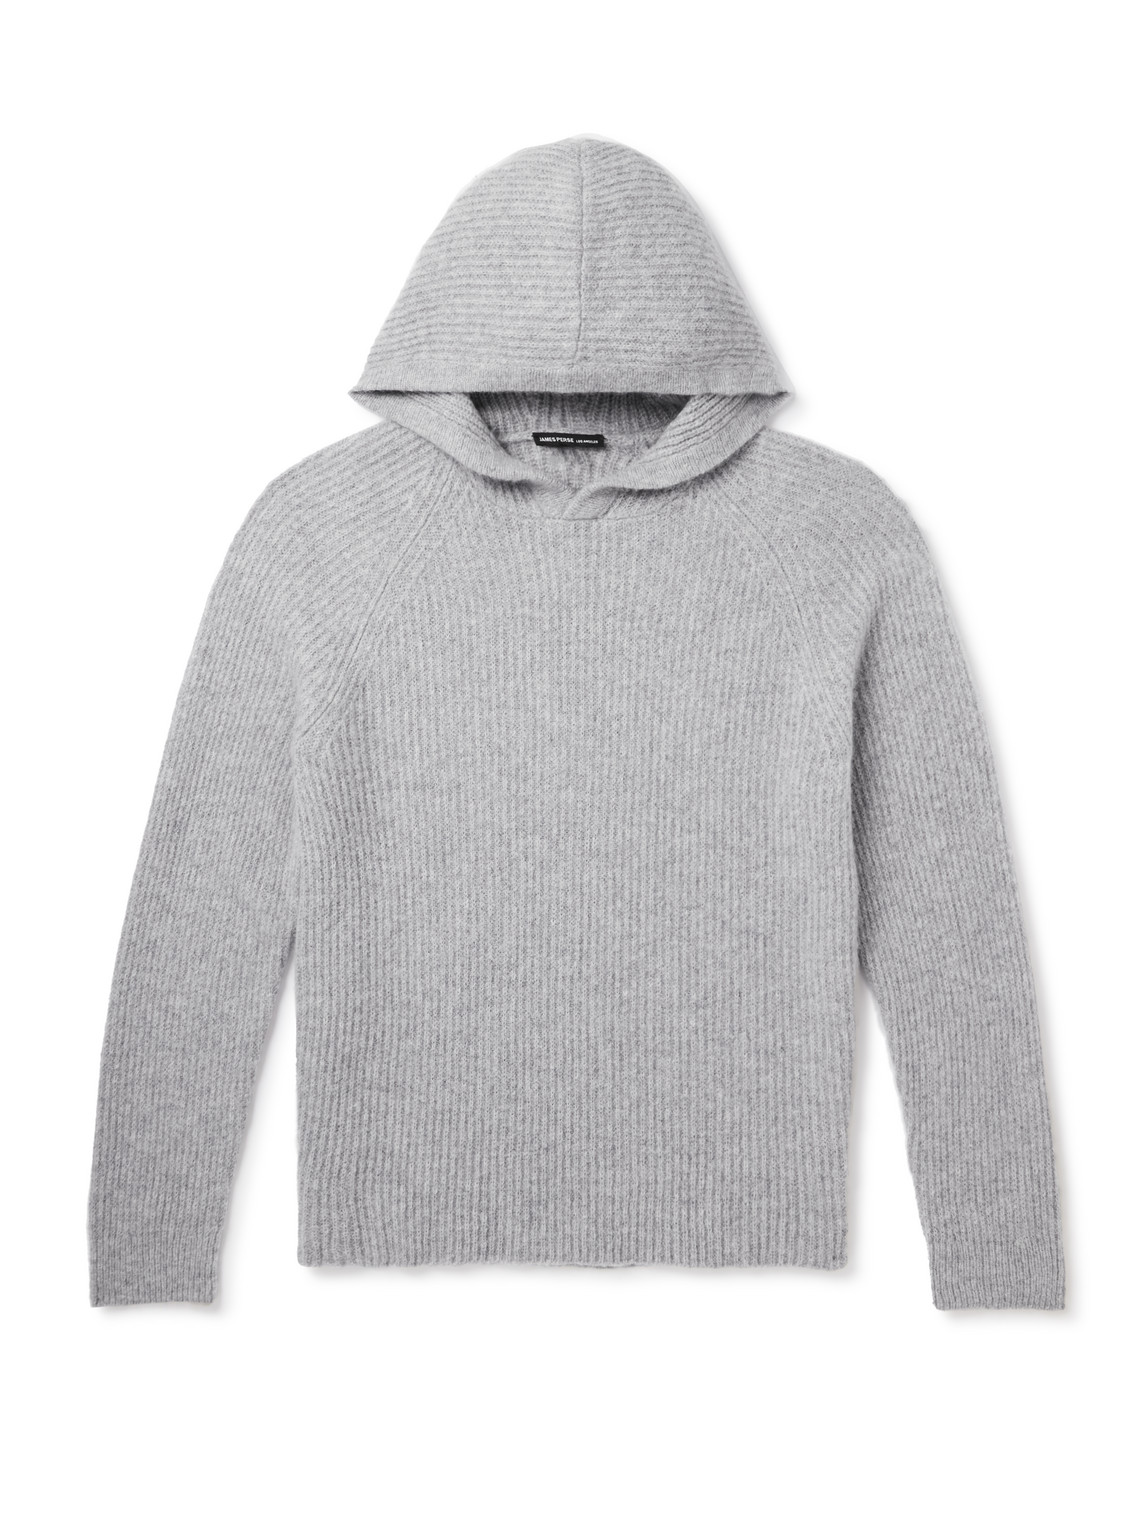 James Perse Ribbed Cashmere Hoodie In Grey